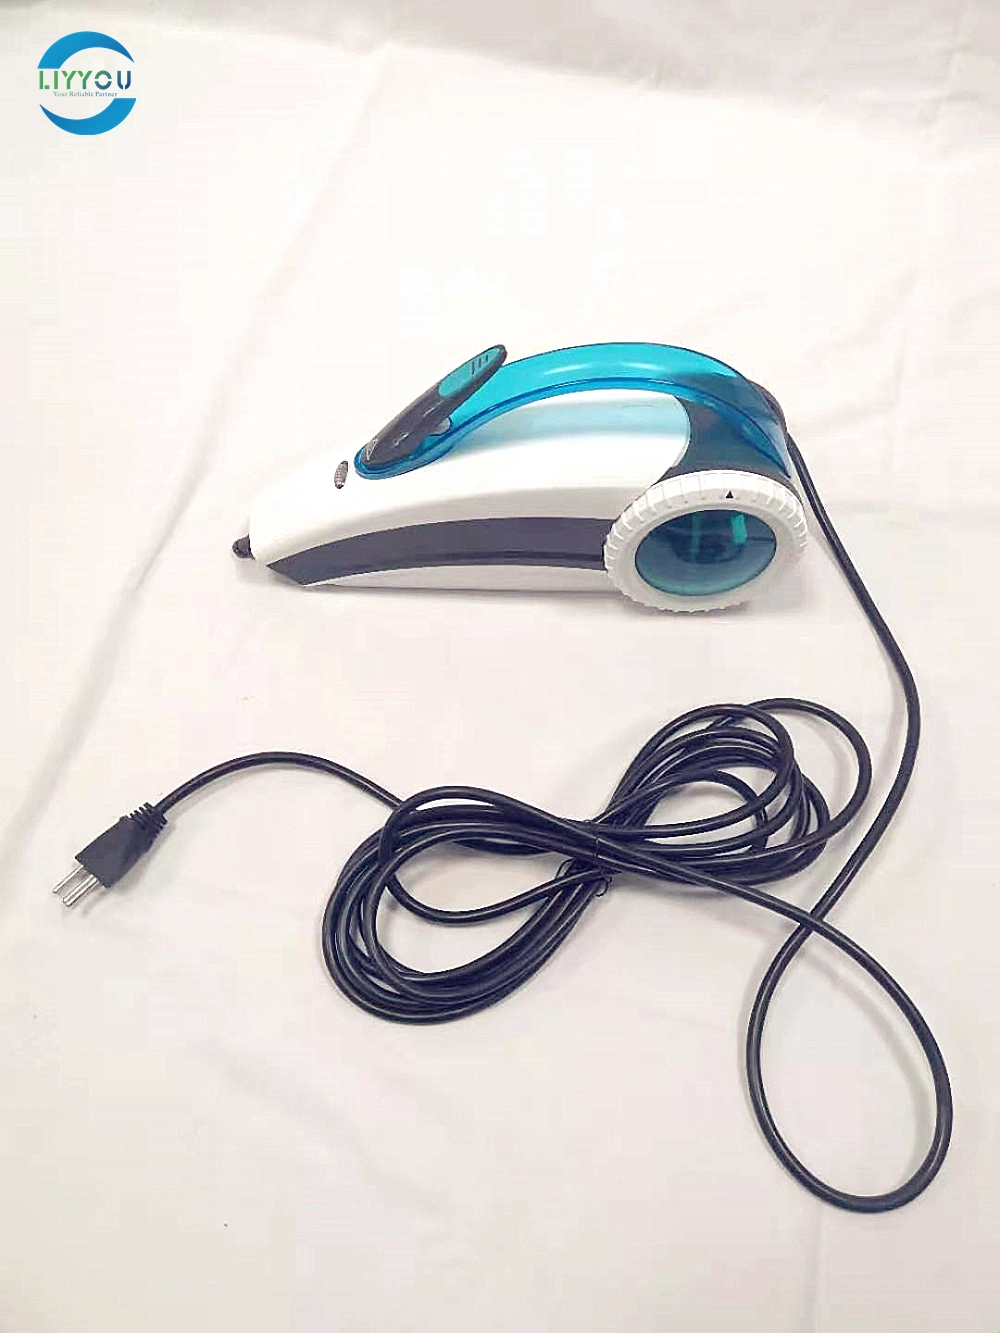 Powerful Steam Cleaner with Vacuum Function for Deep Cleaning